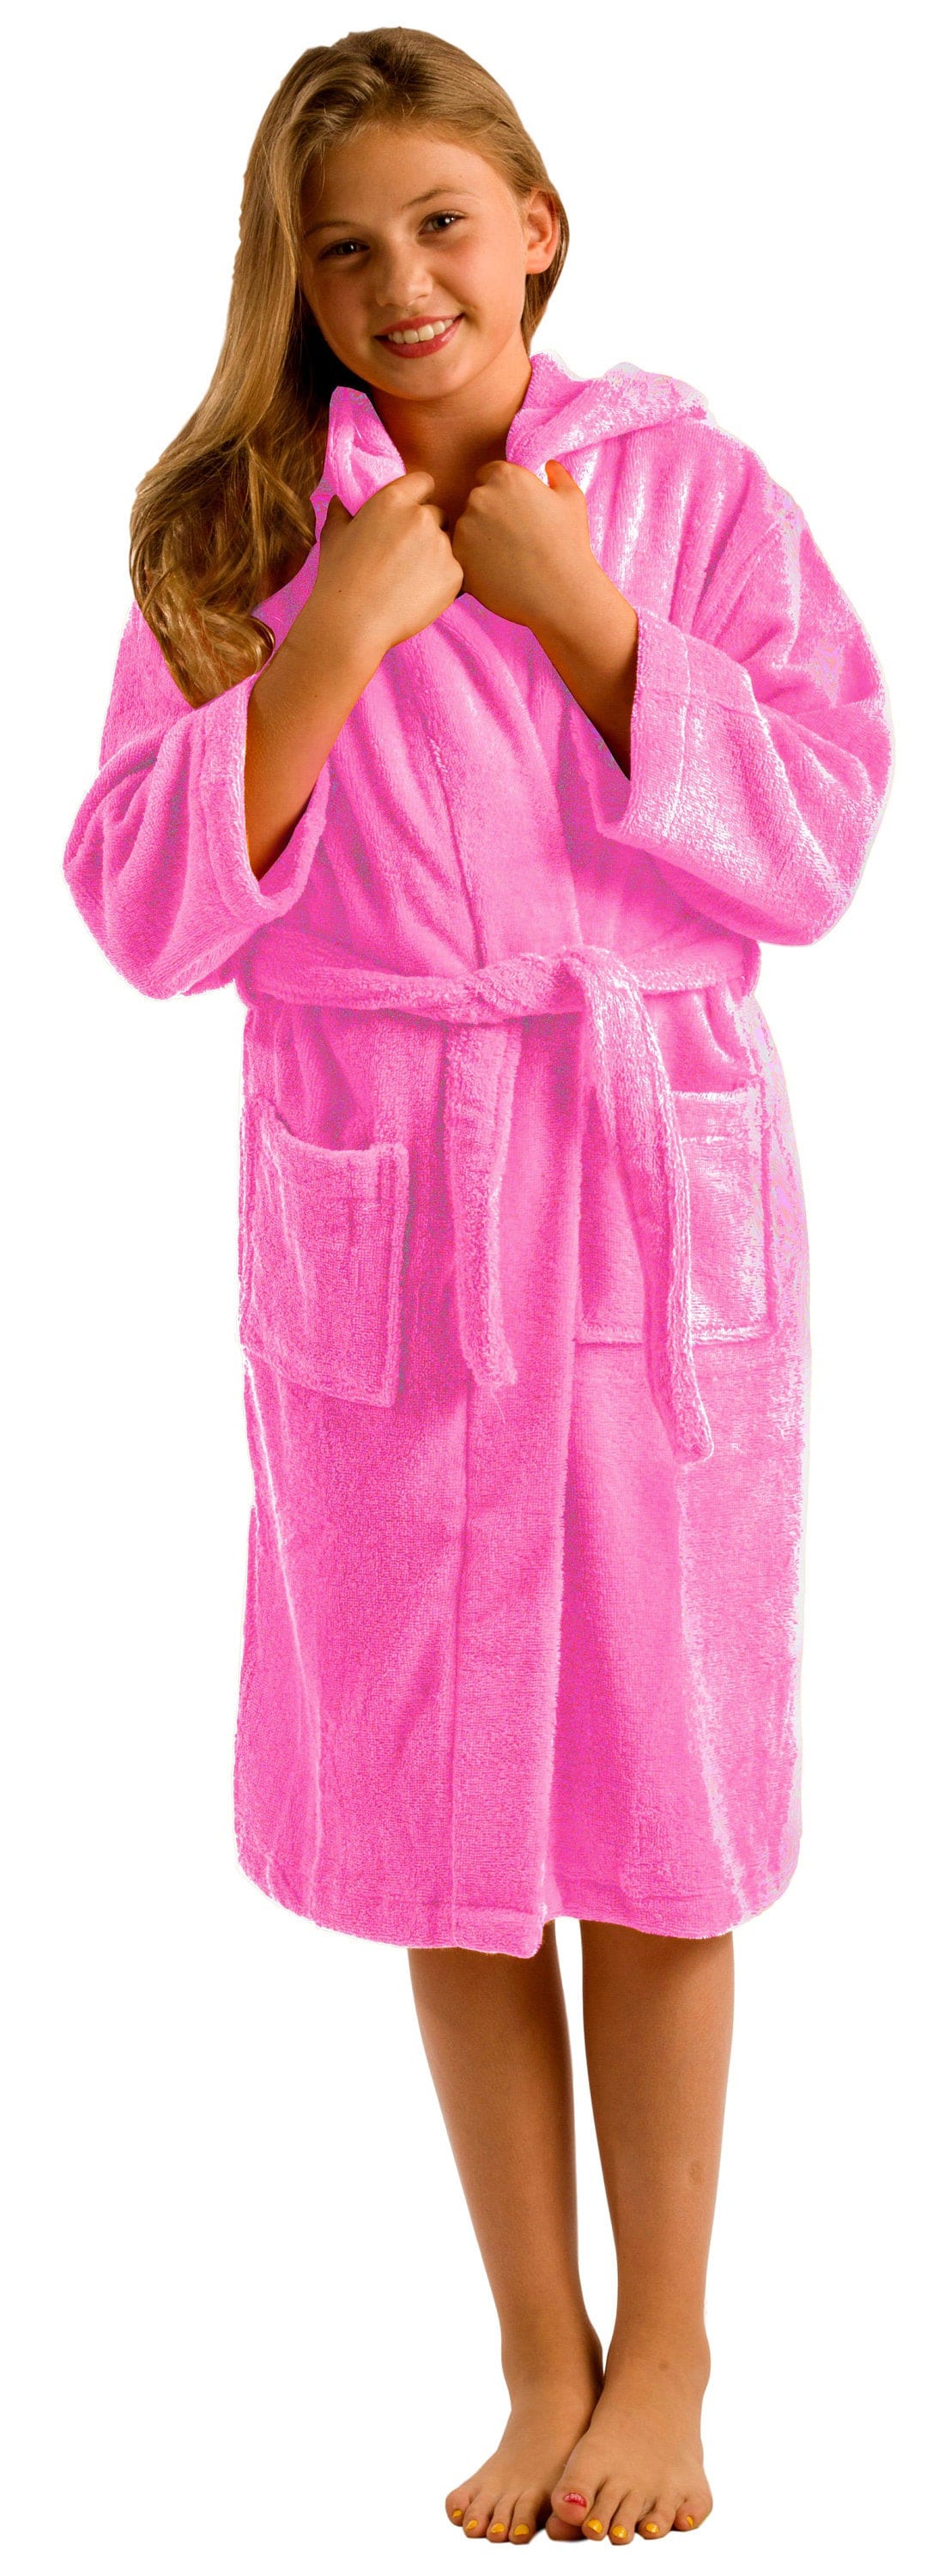 angela hefner recommends bath robes for teens pic